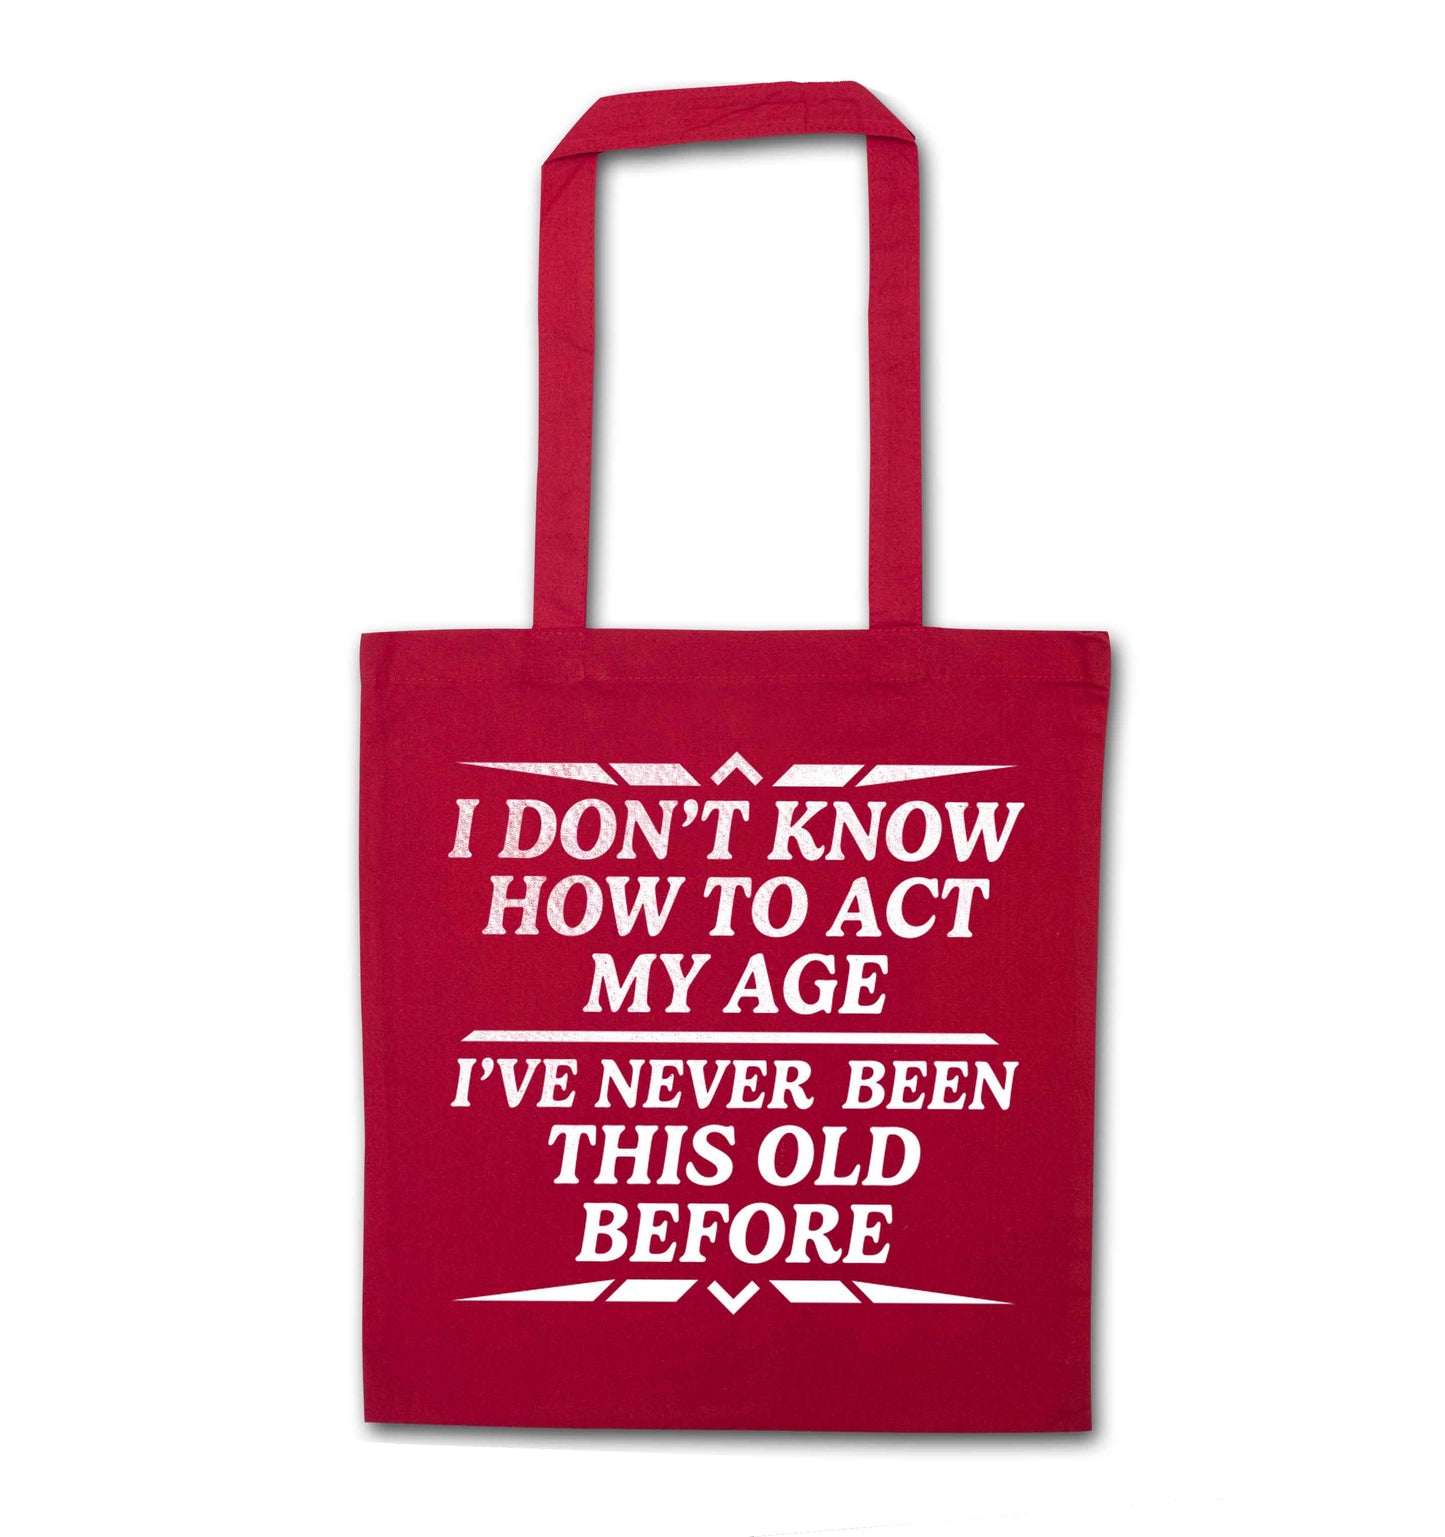 I don't know how to act my age I've never been this old before red tote bag